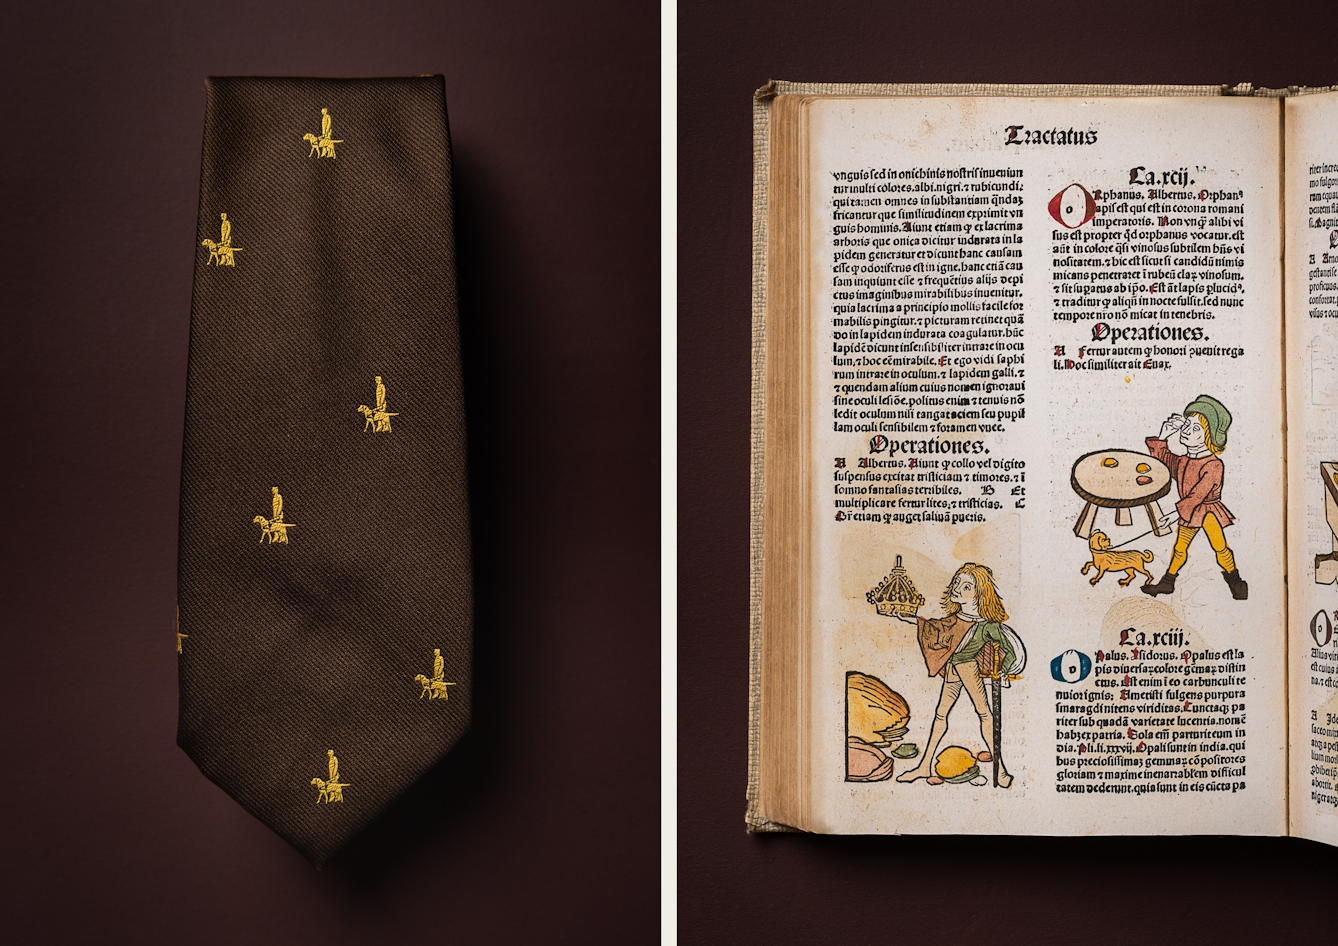 A photographic diptych. The image on the left shows a brown tie neatly folded.  There are small golden guide dogs and guide dog handlers seen from the side, appearing in a repeated pattern. The image on the right shows the left hand page of what appears to be a medieval book featuring Latin text and illustrations. On the bottom left of the page, there is a figure of a man holding a sword in one hand and a crown held out before him in the other. The figure of a man on the other side of the page shows him holding a small dog on a lead. He is stood by a table and holding something to his eye. Both illustrations are coloured with yellow, green and brown only. The figures are dressed in tights and tunics. The items appear on a plain brown background.